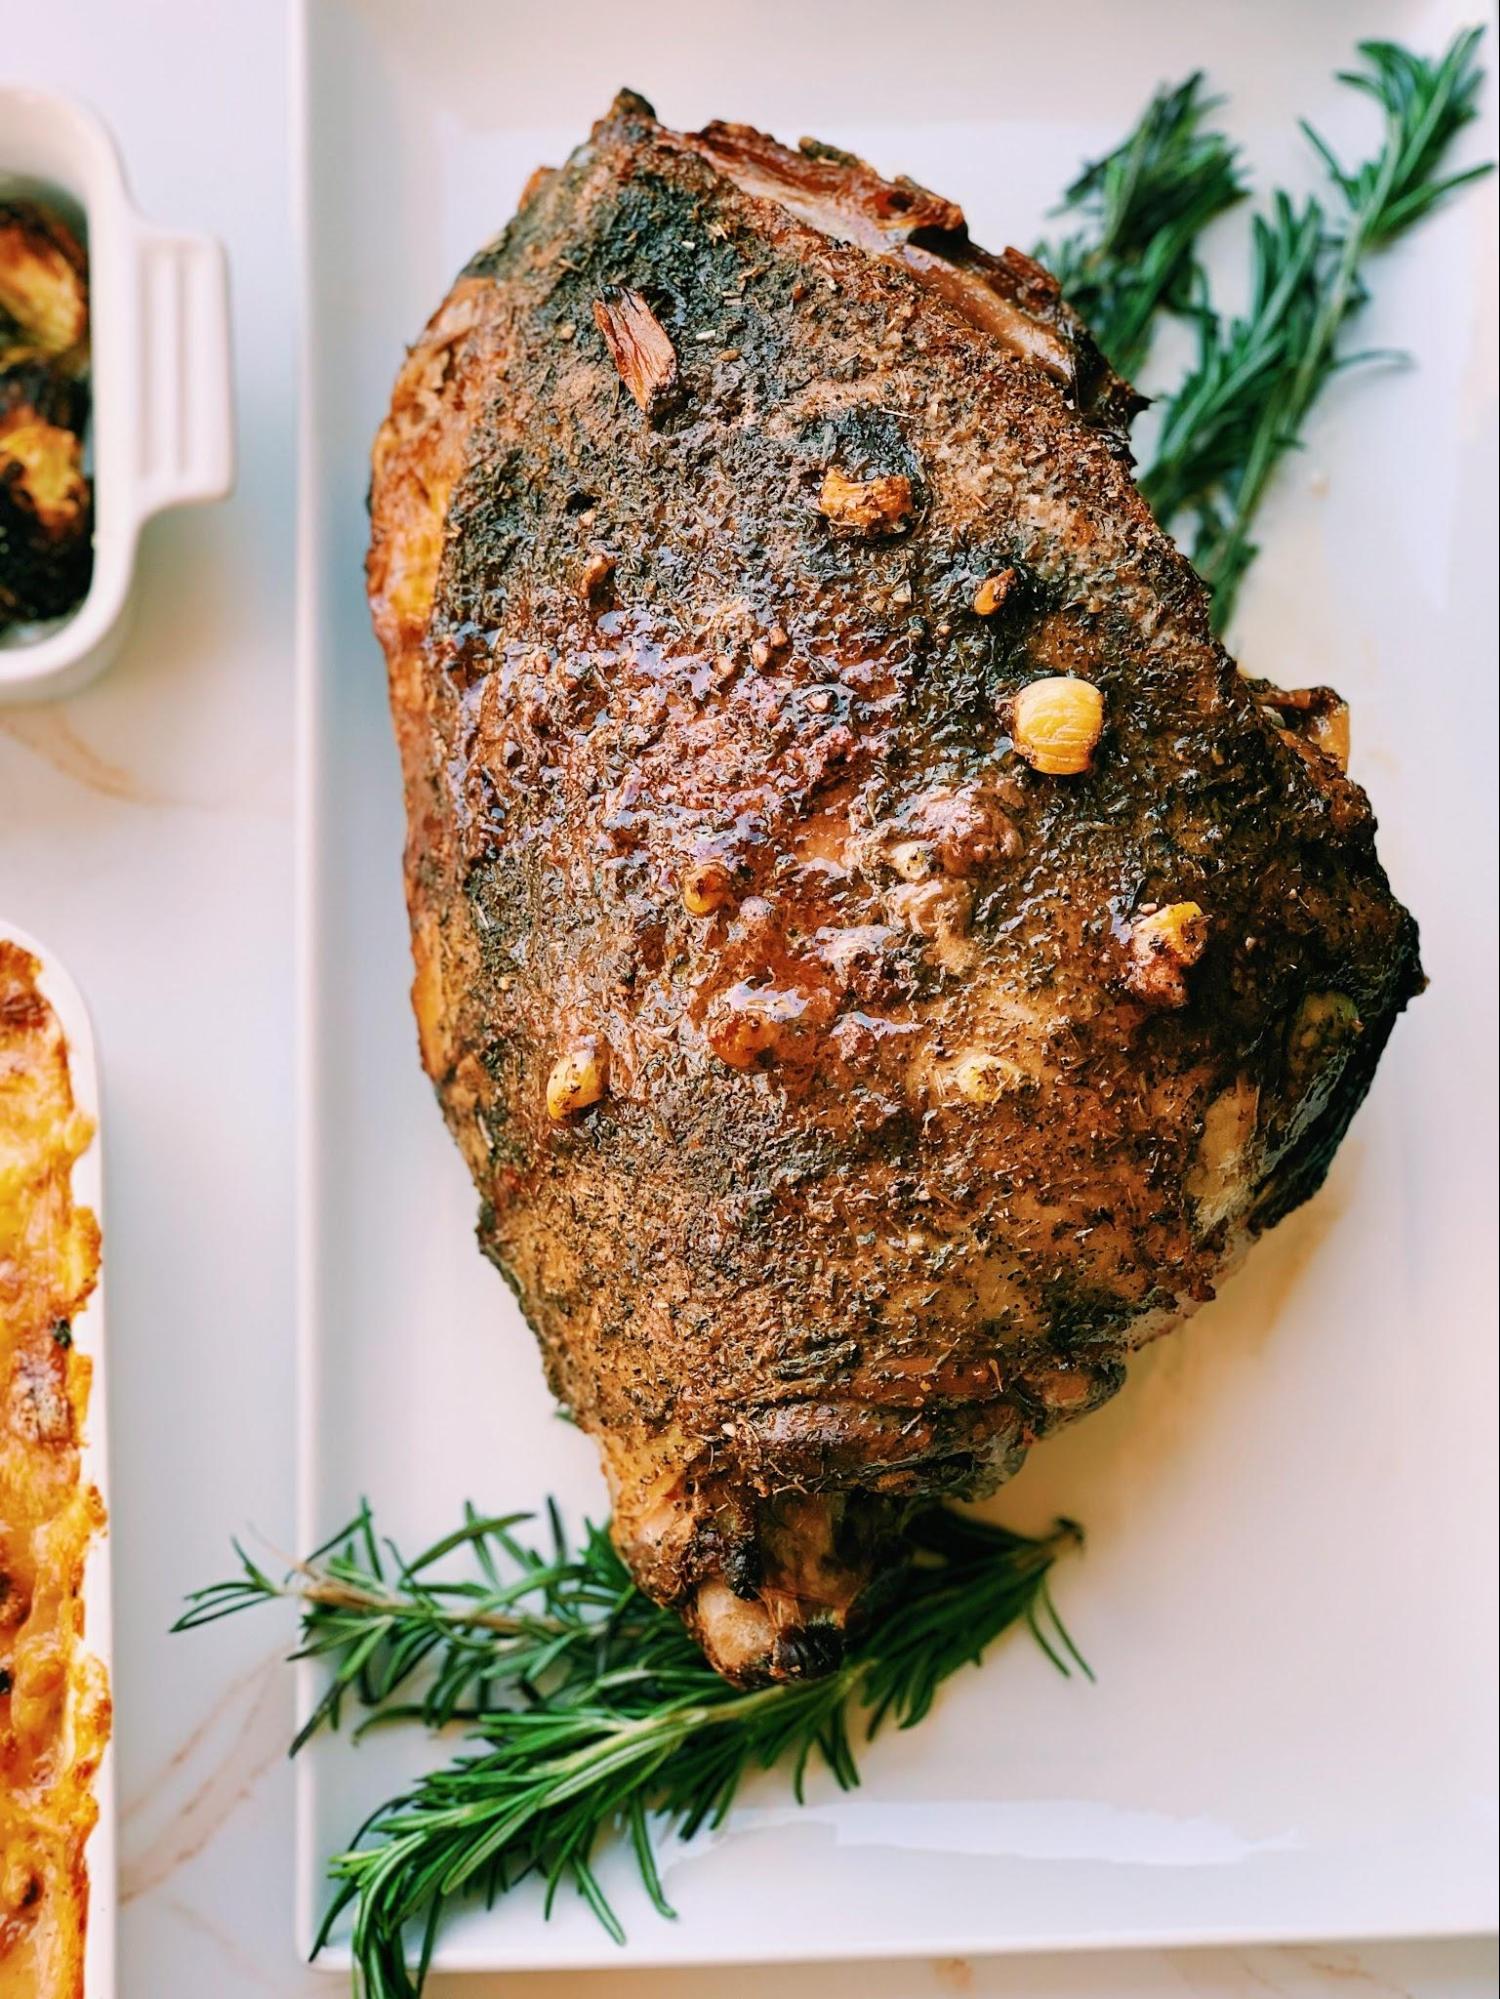 How to cook a leg of lamb